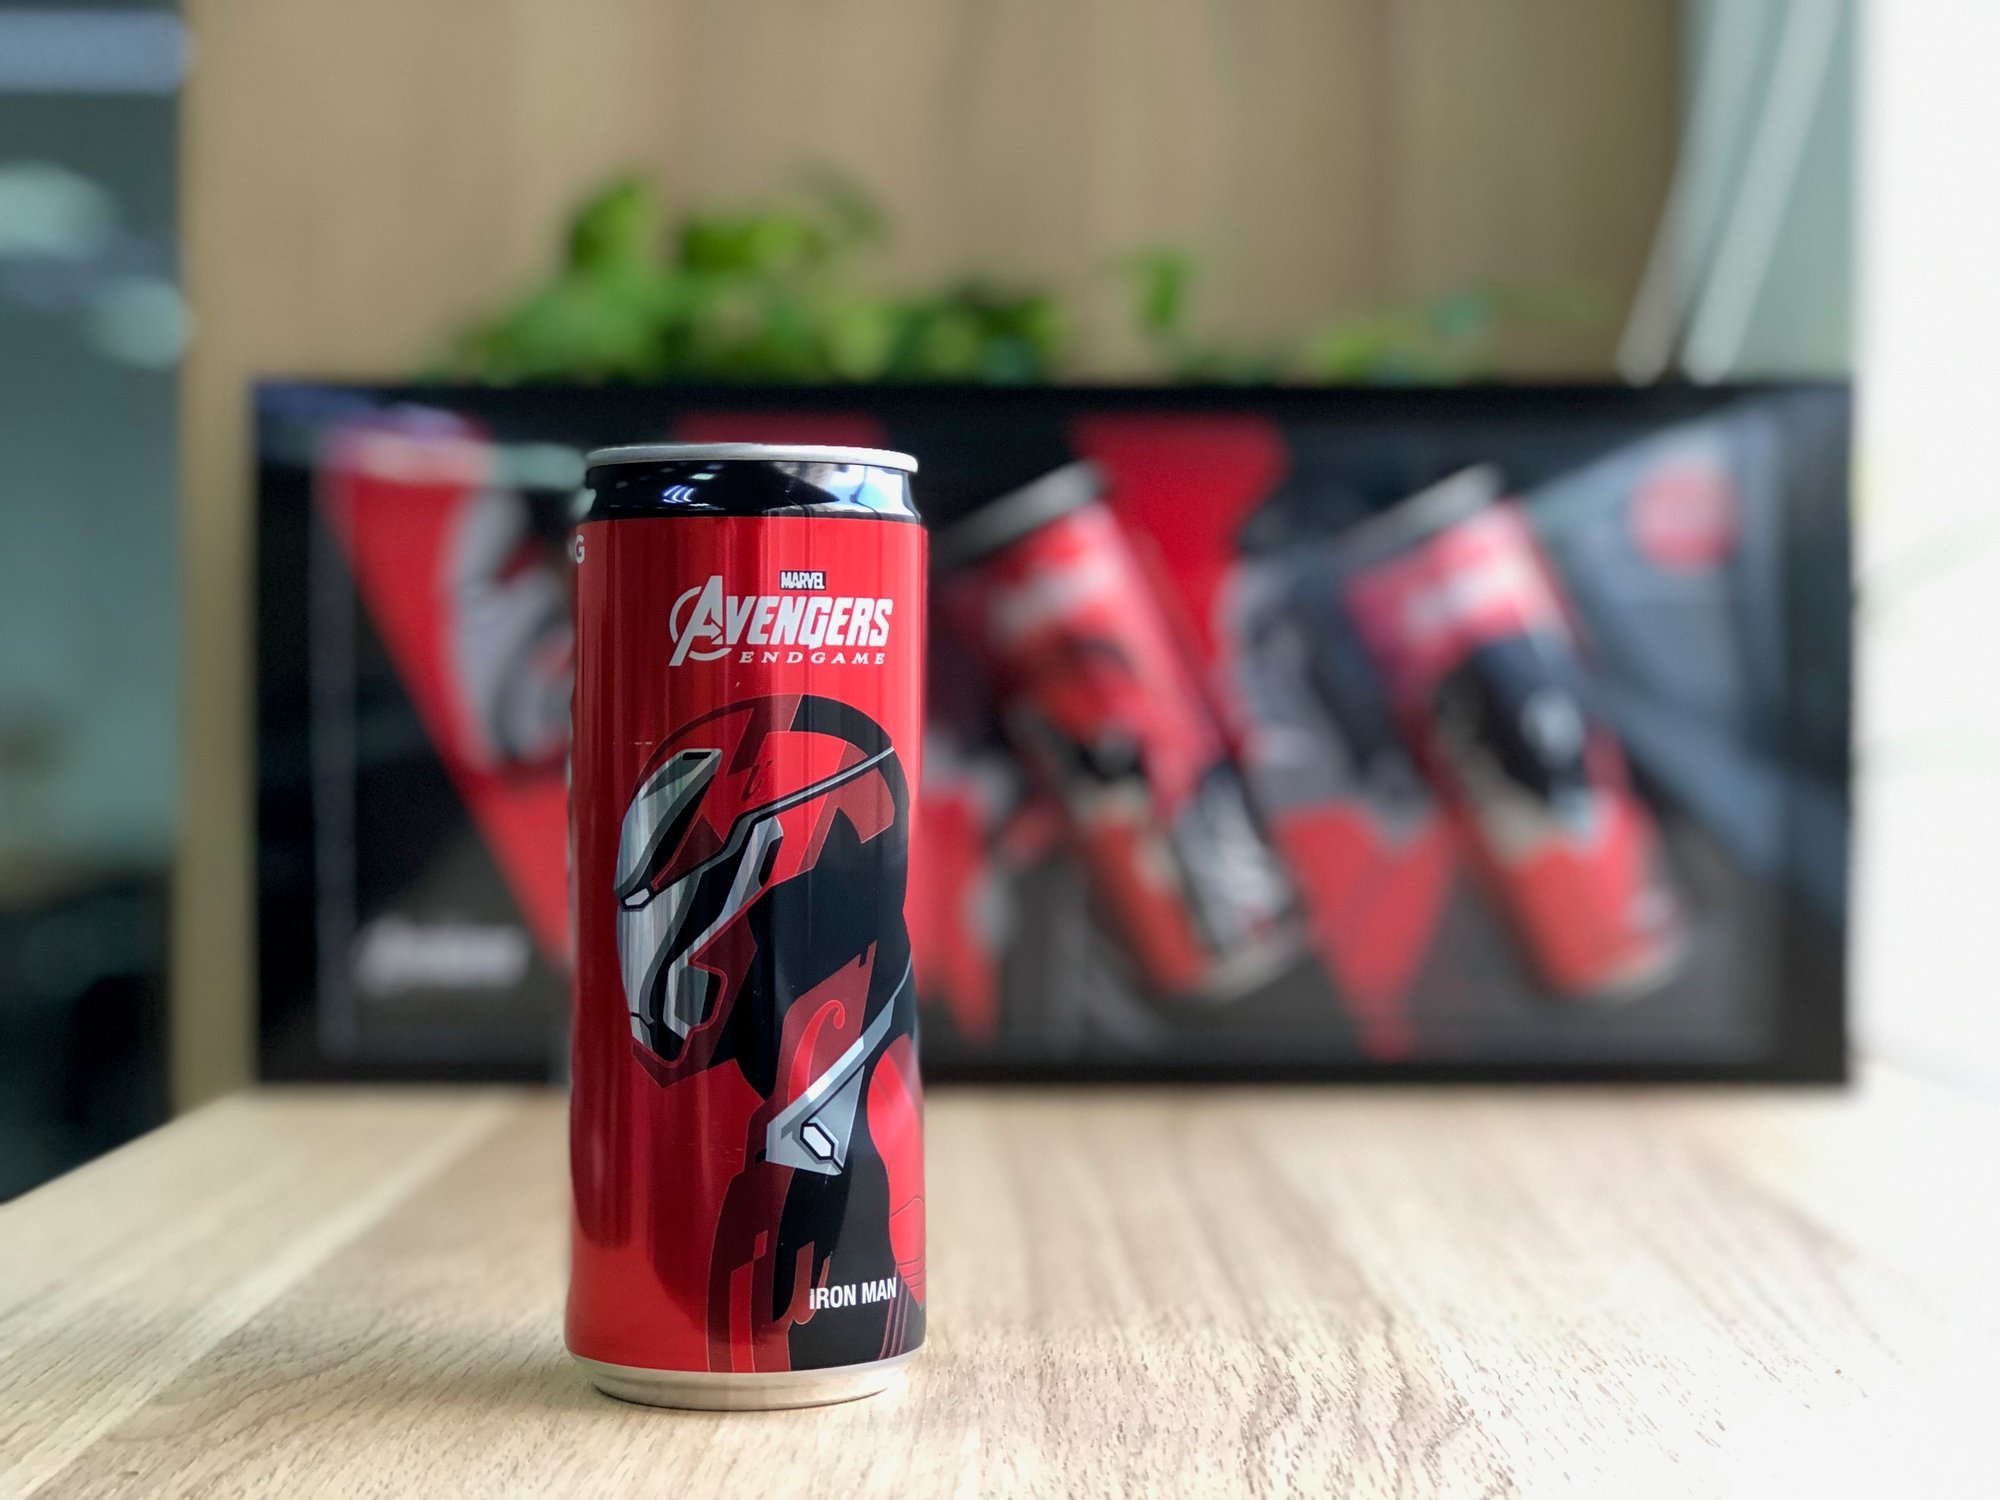 Coca-Cola "Avengers" Limited Edition